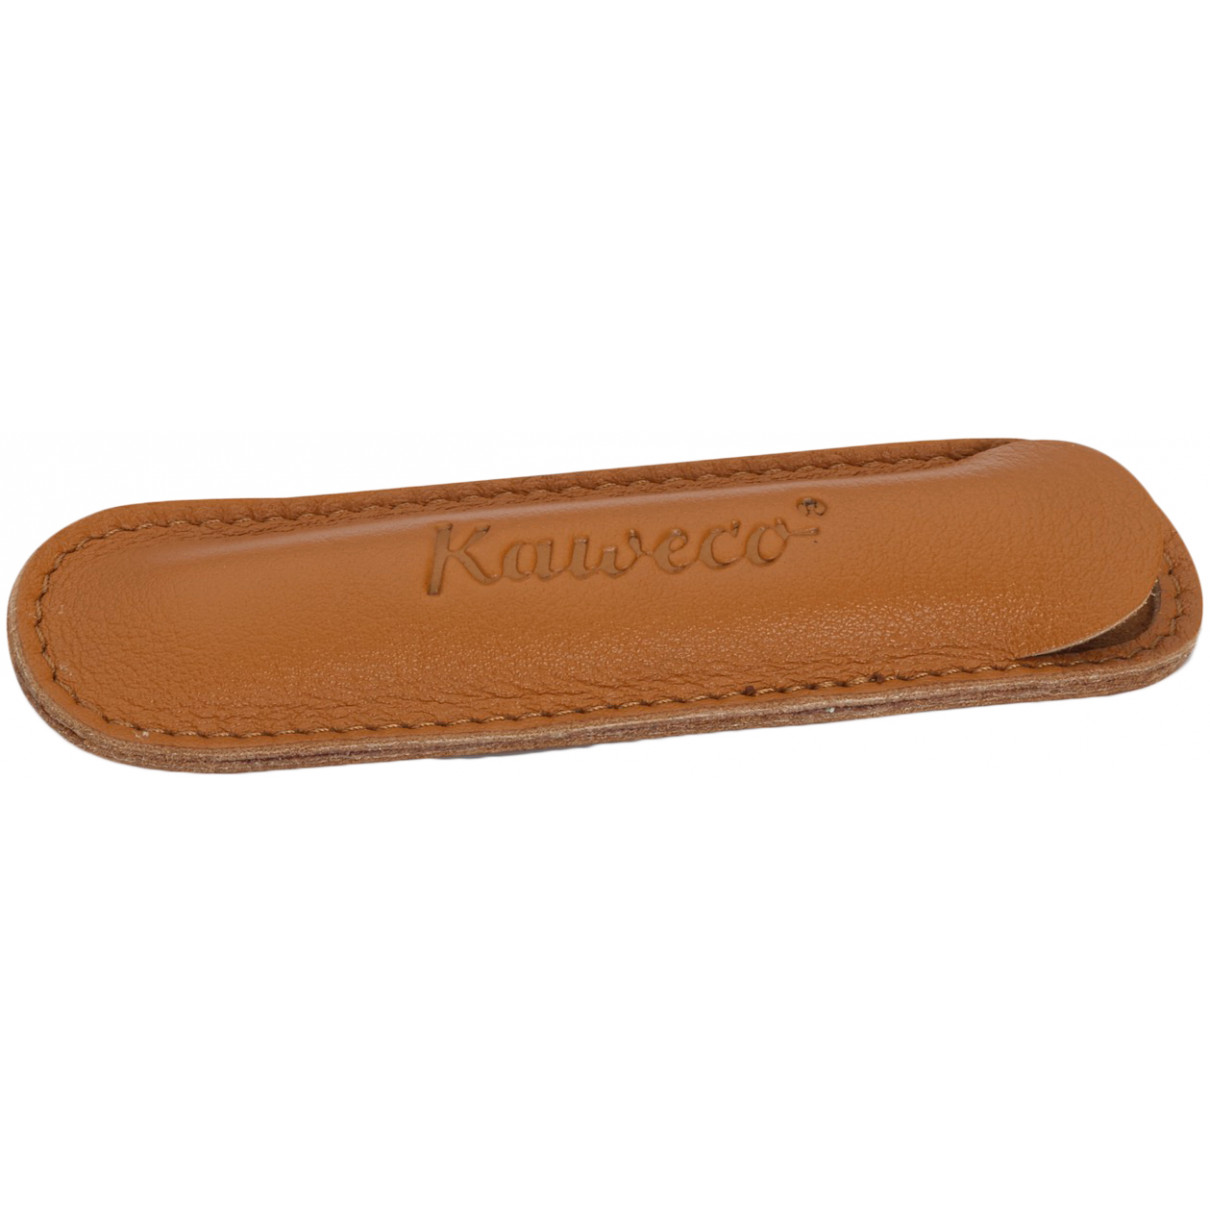 Kaweco Eco Leather Pouch for Liliput Pens - Brandy - Double